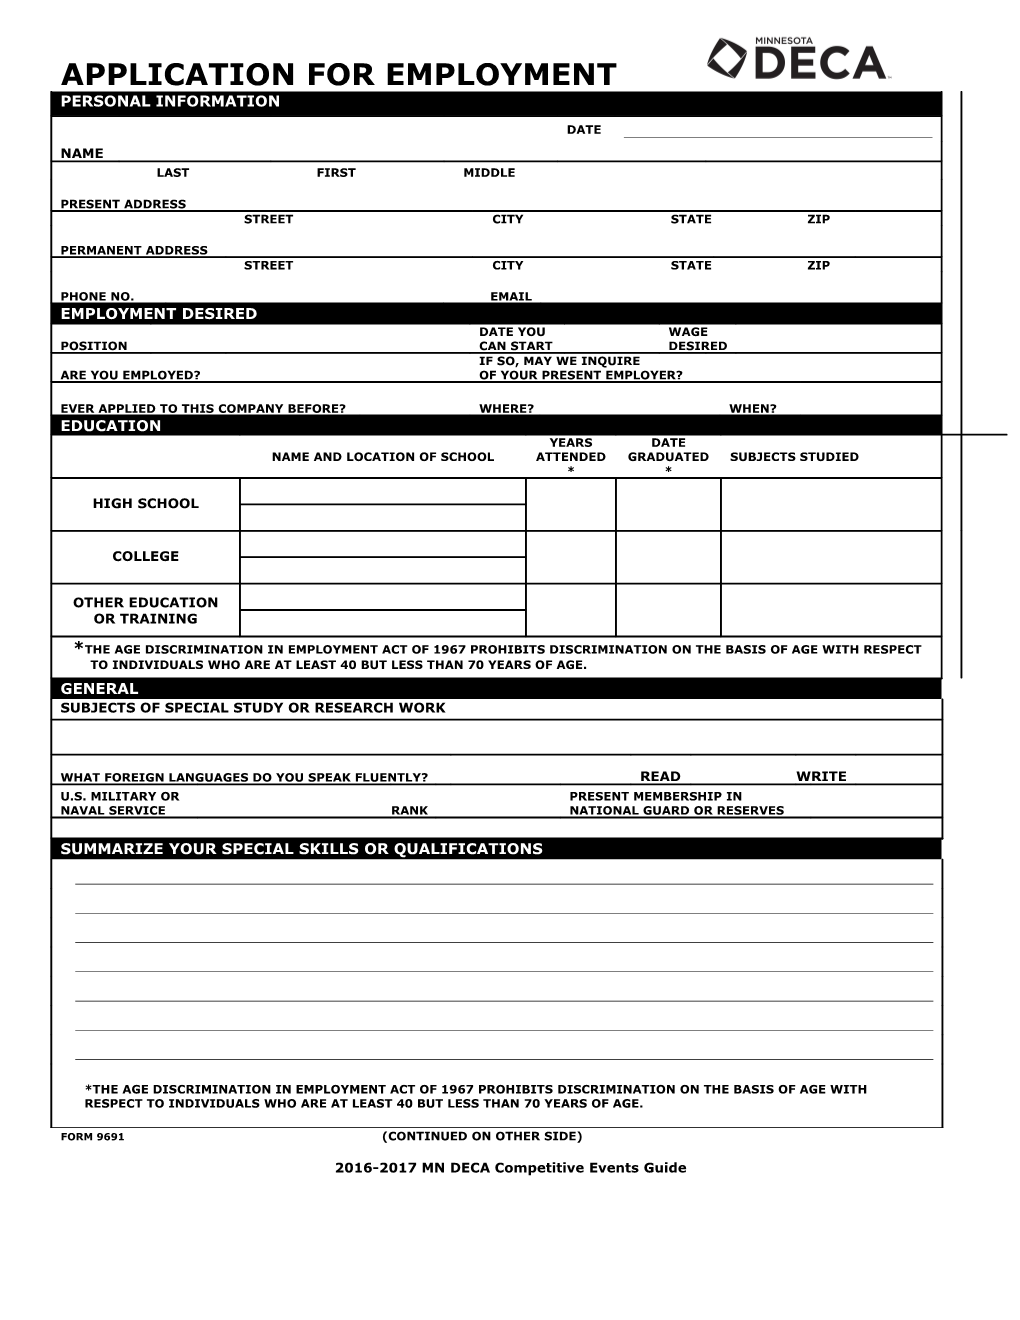 Application for Employment s111